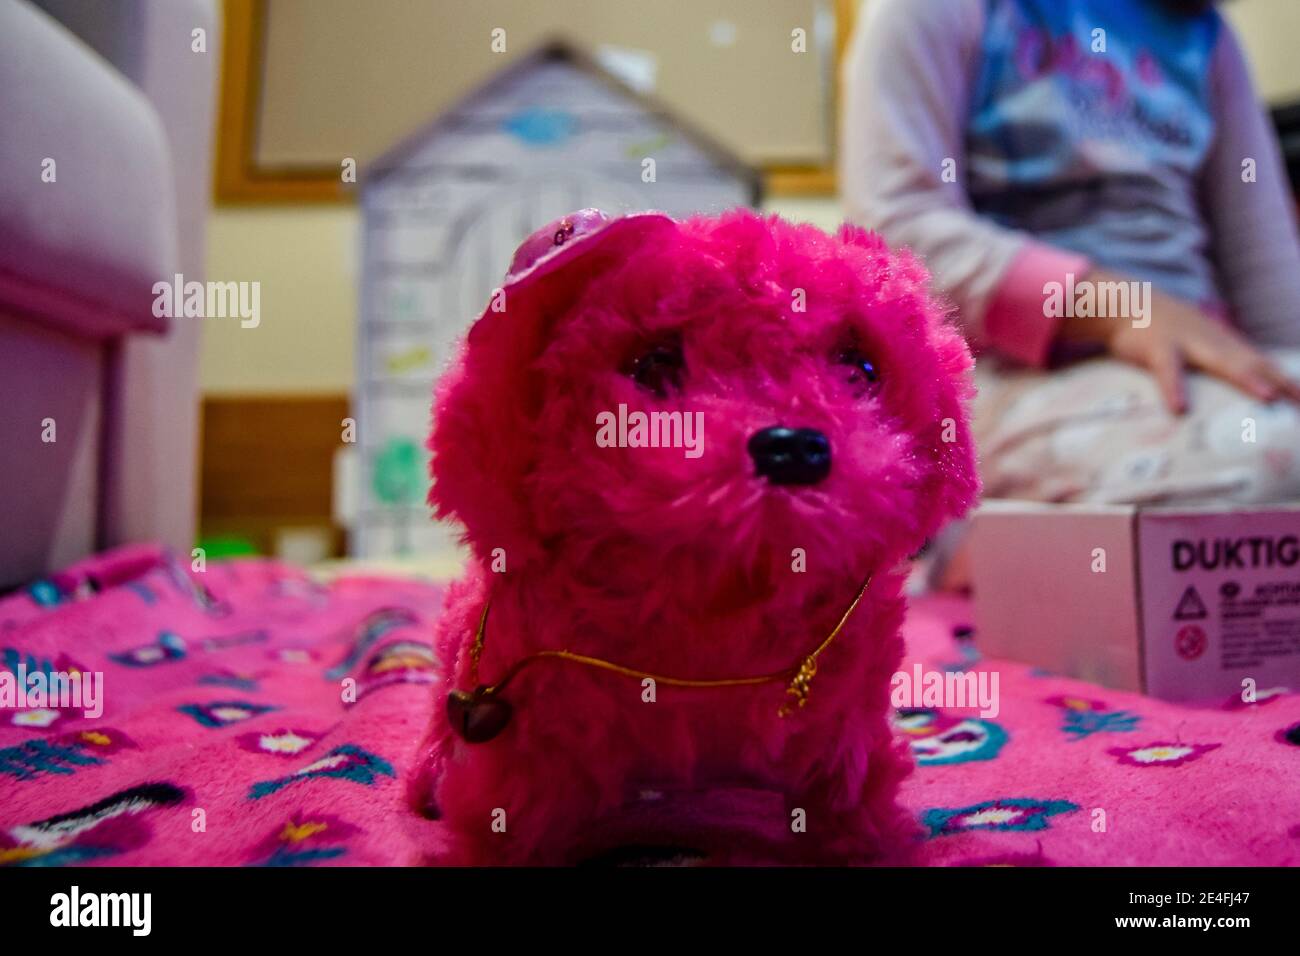 Pink dog toy with girl on background, children toys with pink colors. Little pink toy dog. Stock Photo